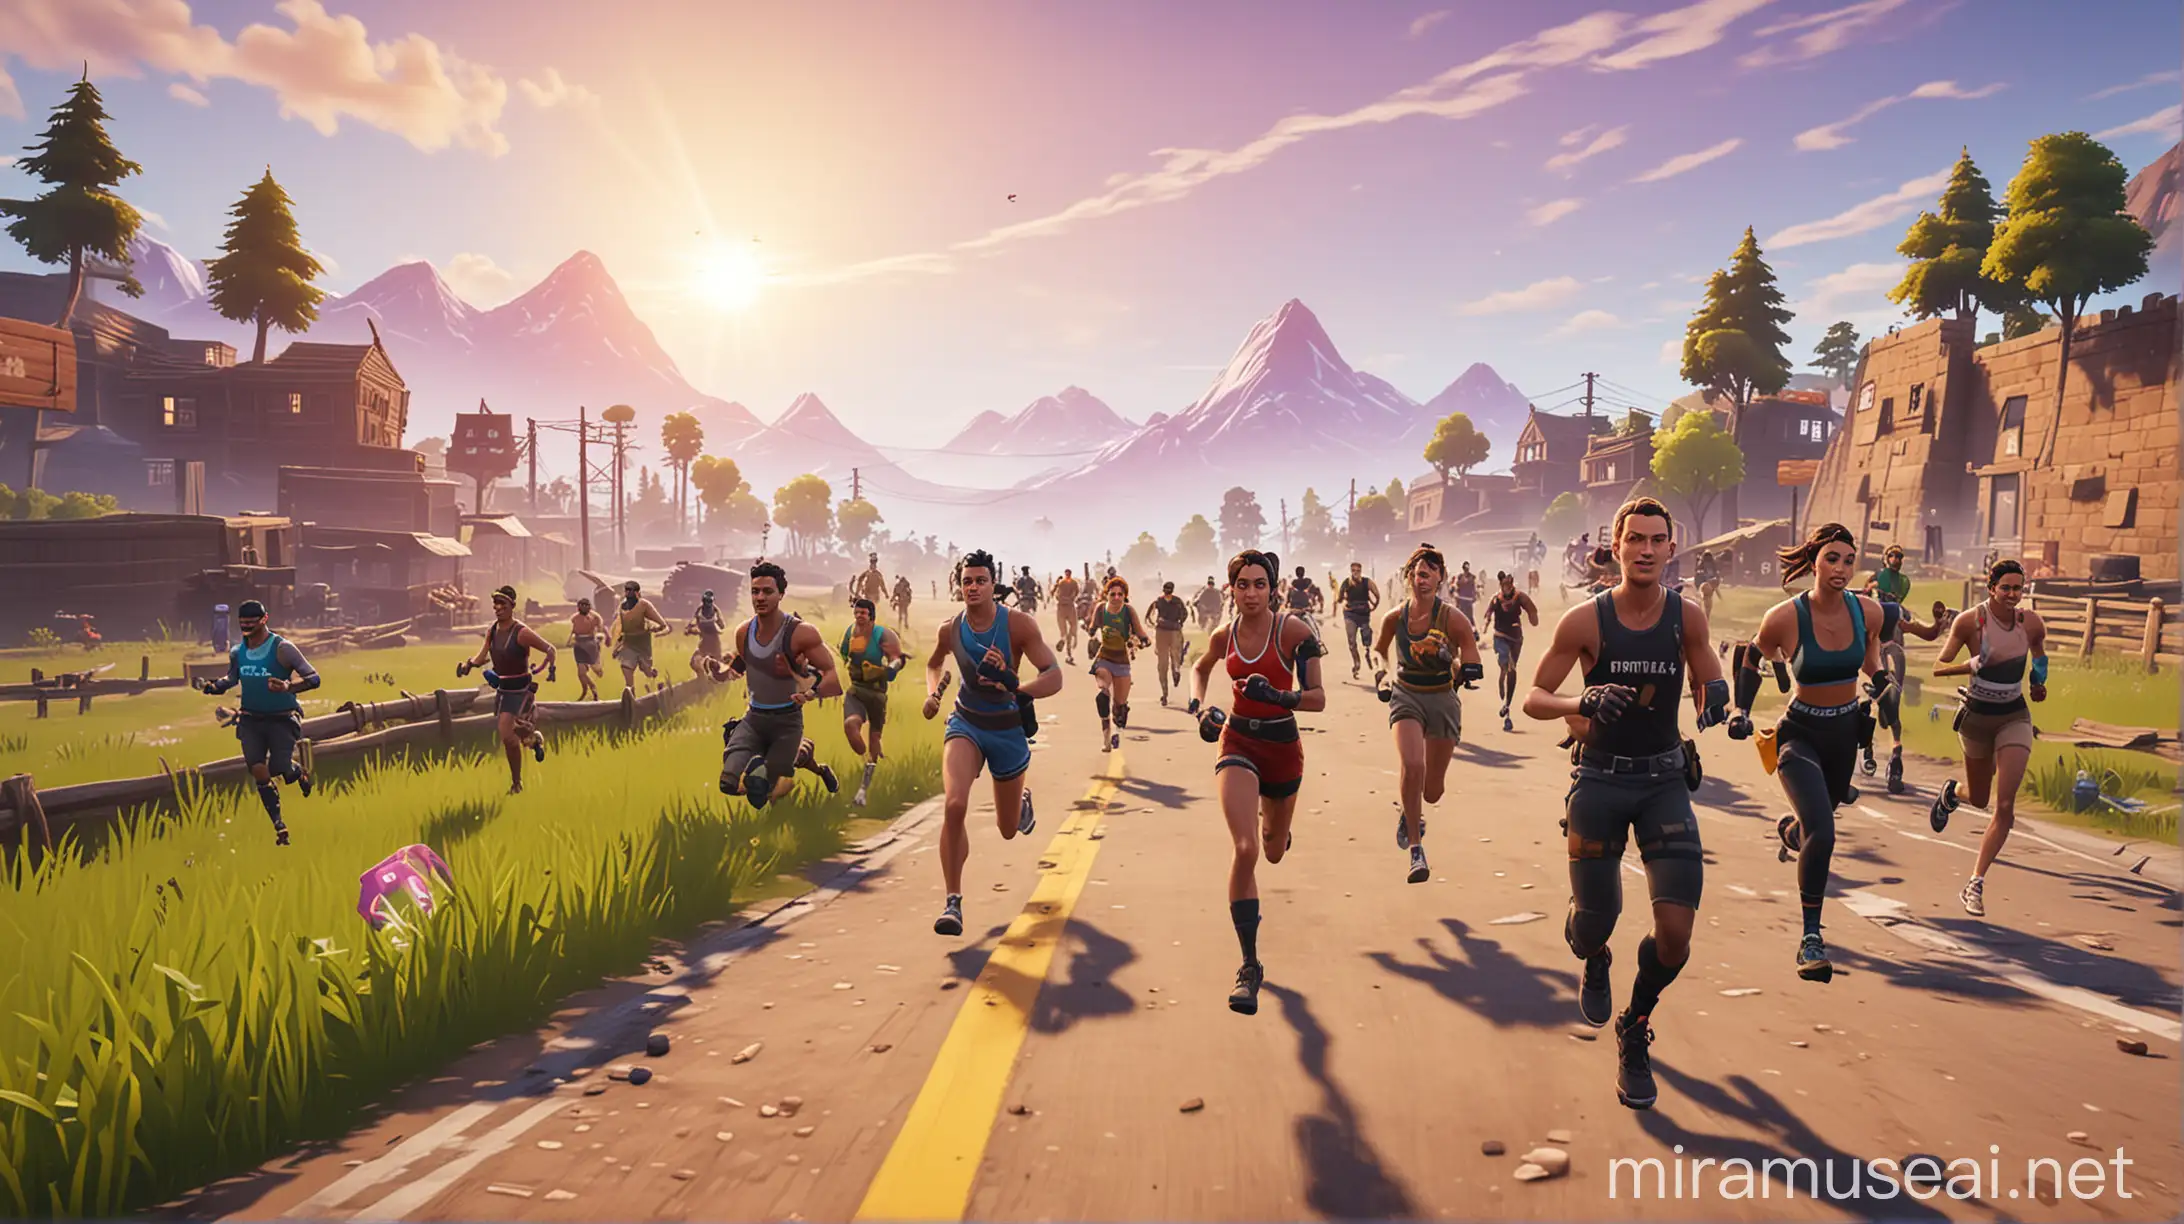 Marathon Running Fortnite Style Gamers Sprinting Through Virtual Obstacles